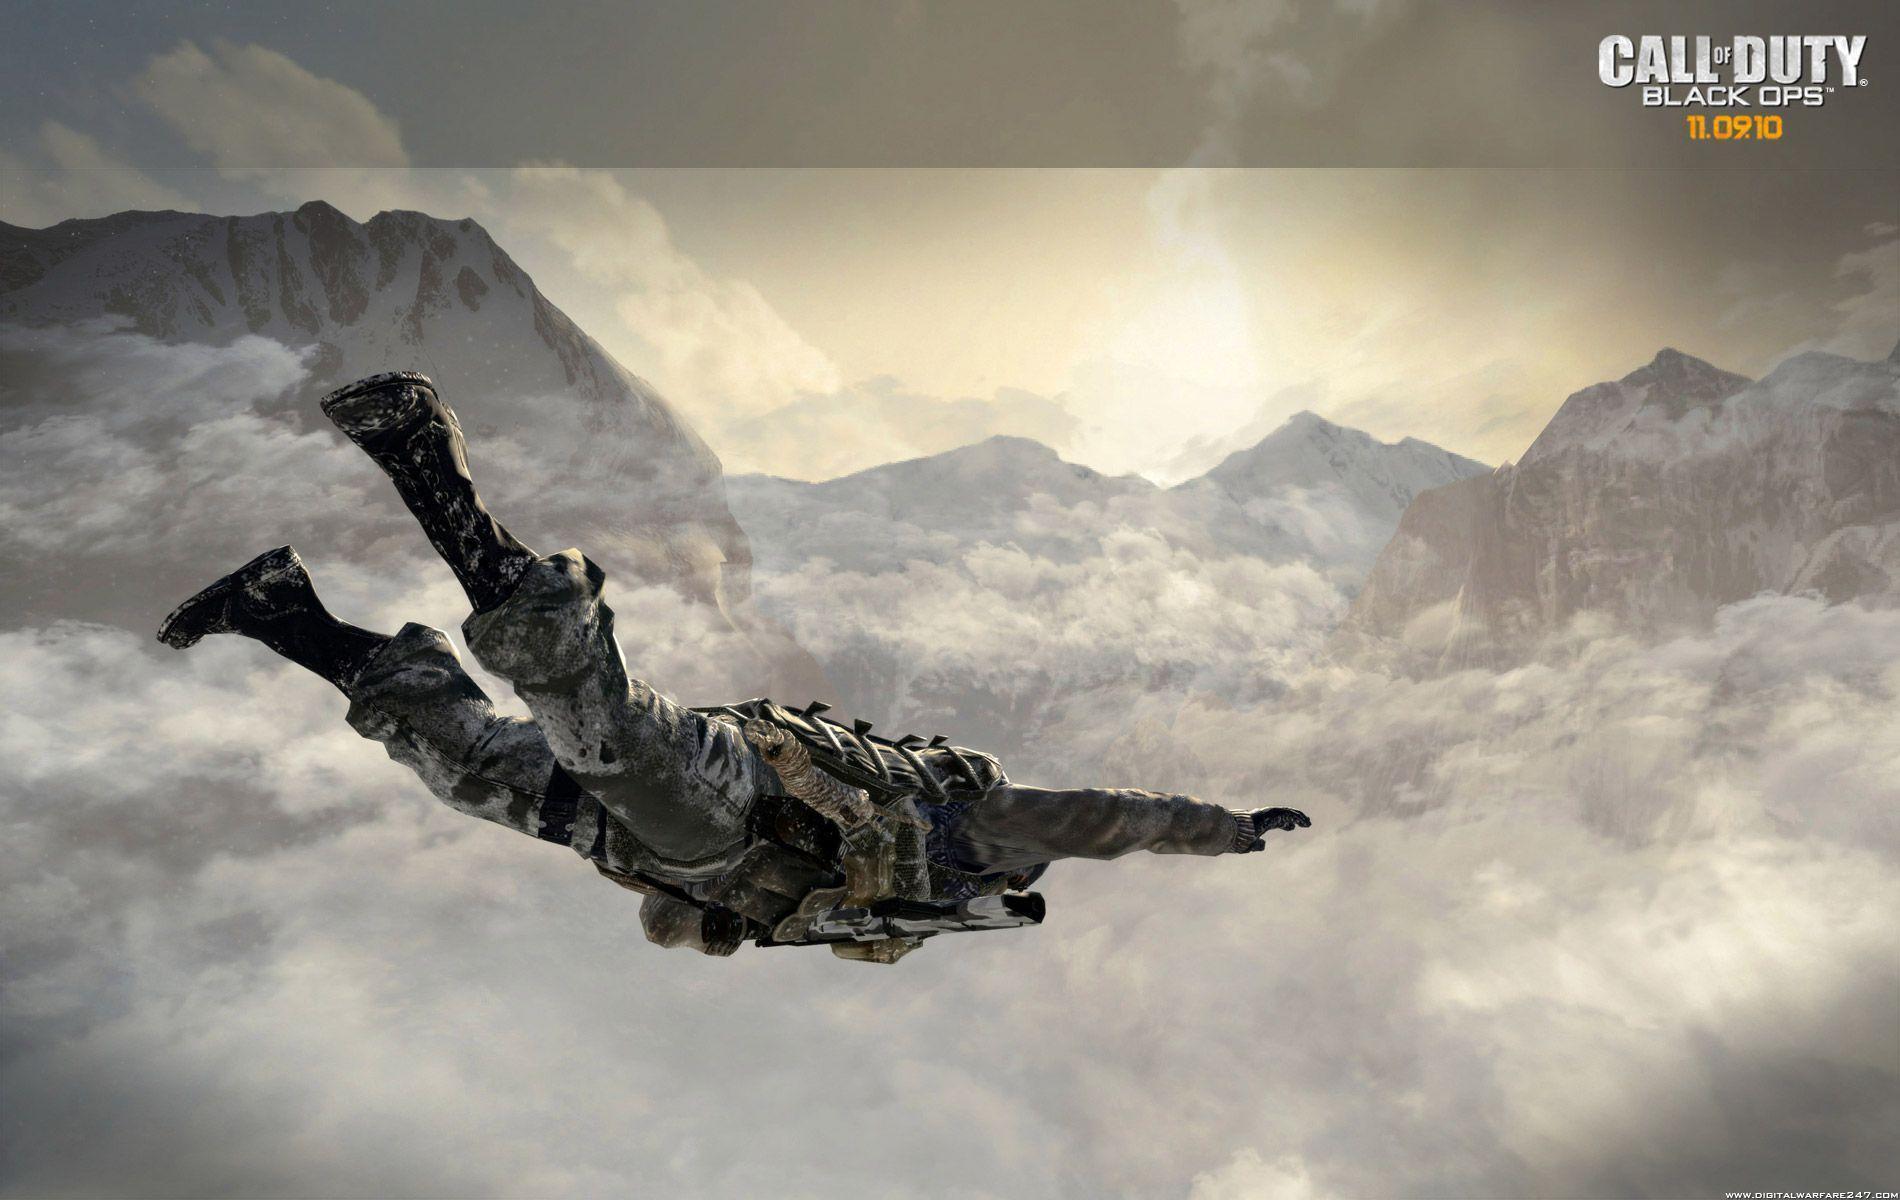 Wallpapers For > Army Ranger Wallpapers 1920x1080